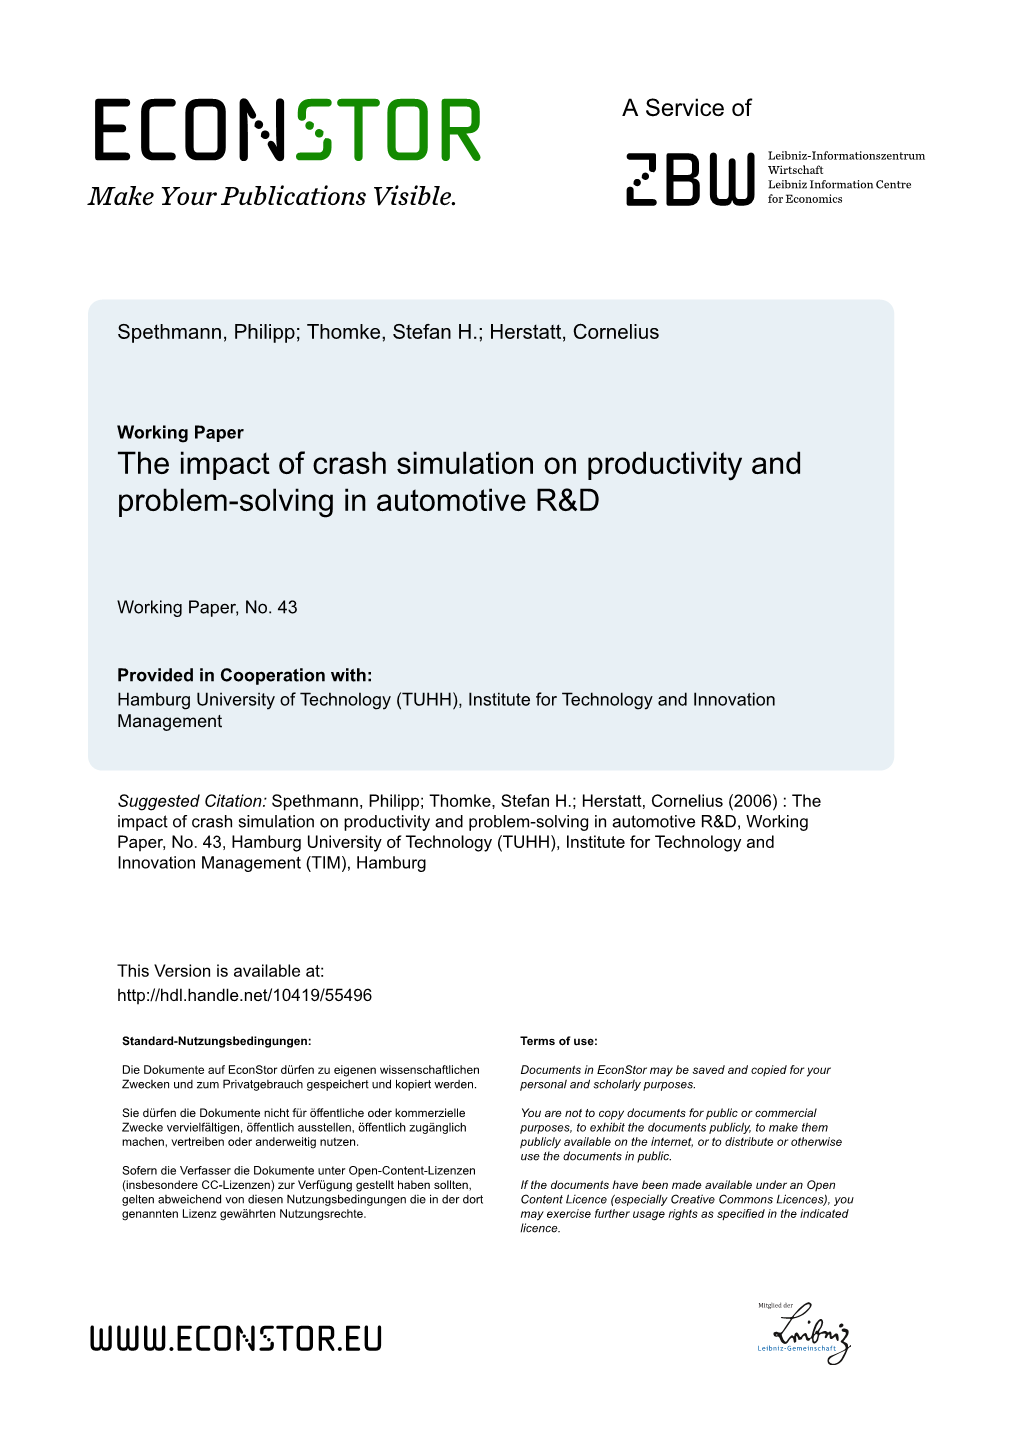 The Impact of Crash Simulation on Productivity and Problem-Solving in Automotive R&D